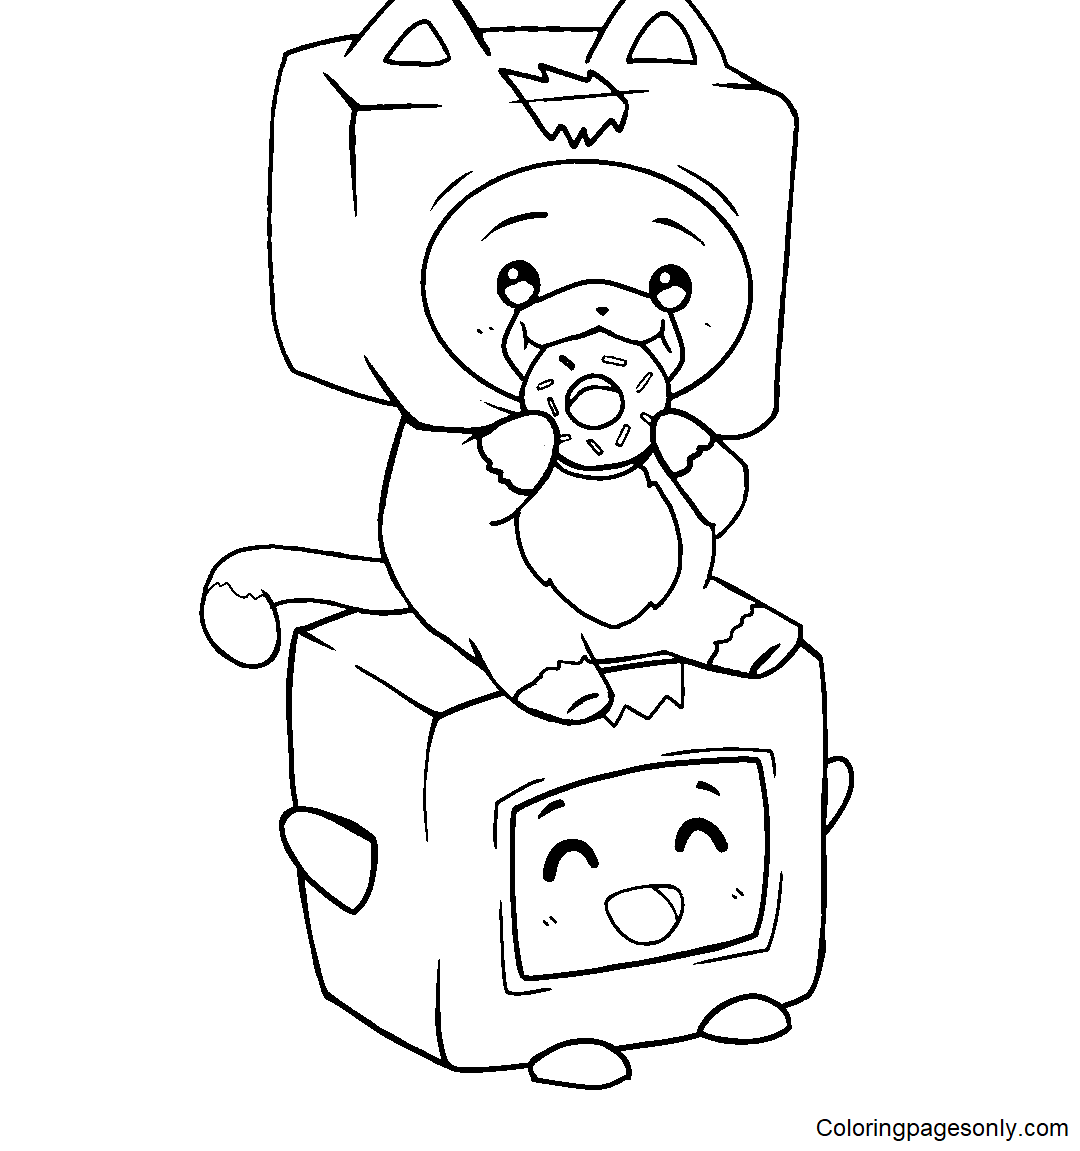 Lankybox coloring pages printable for free download